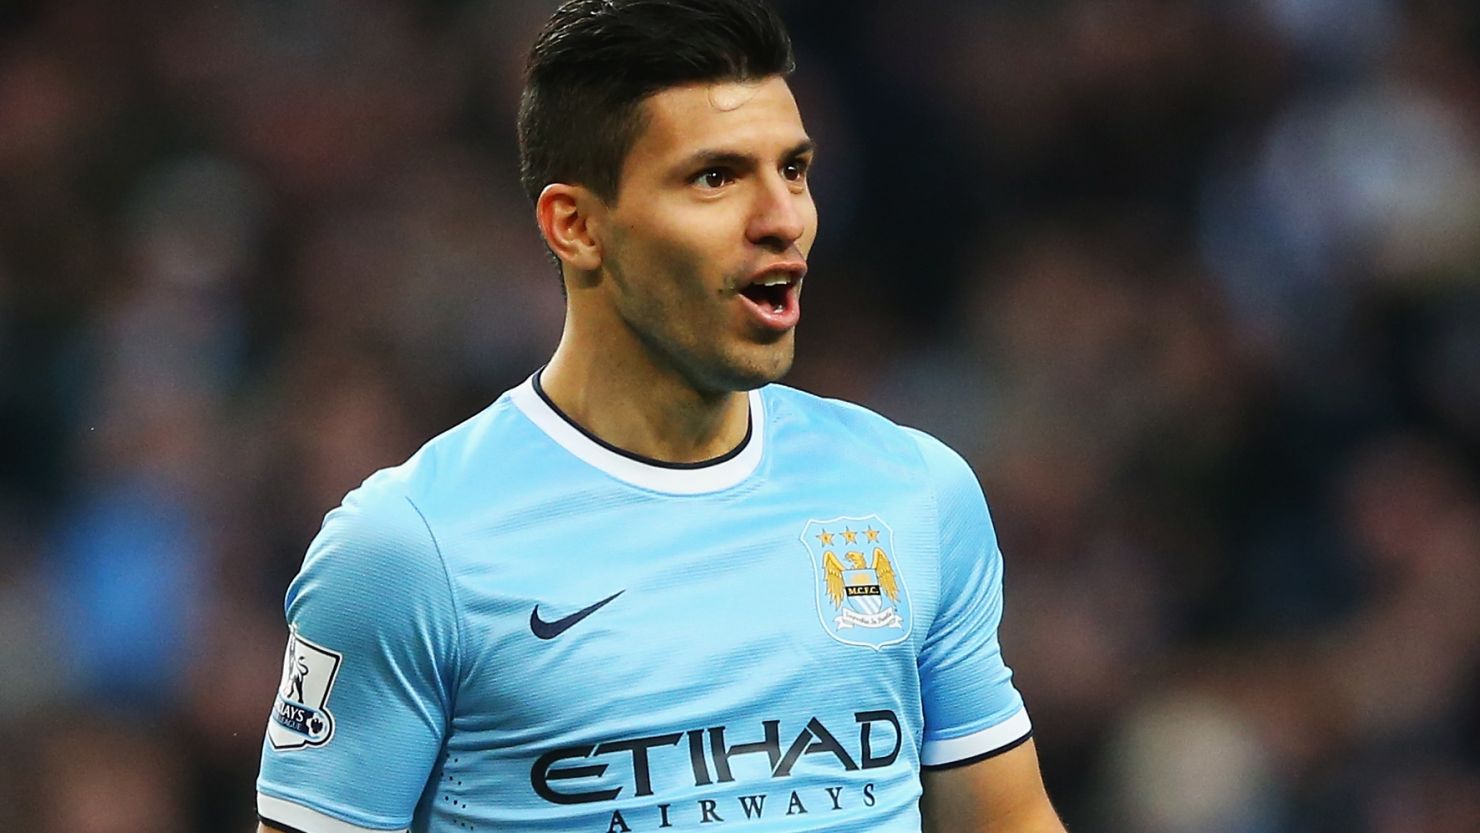 Sergio Aguero was at the top of his game as Manchester City humiliated Tottenham 6-0 at the Etihad.